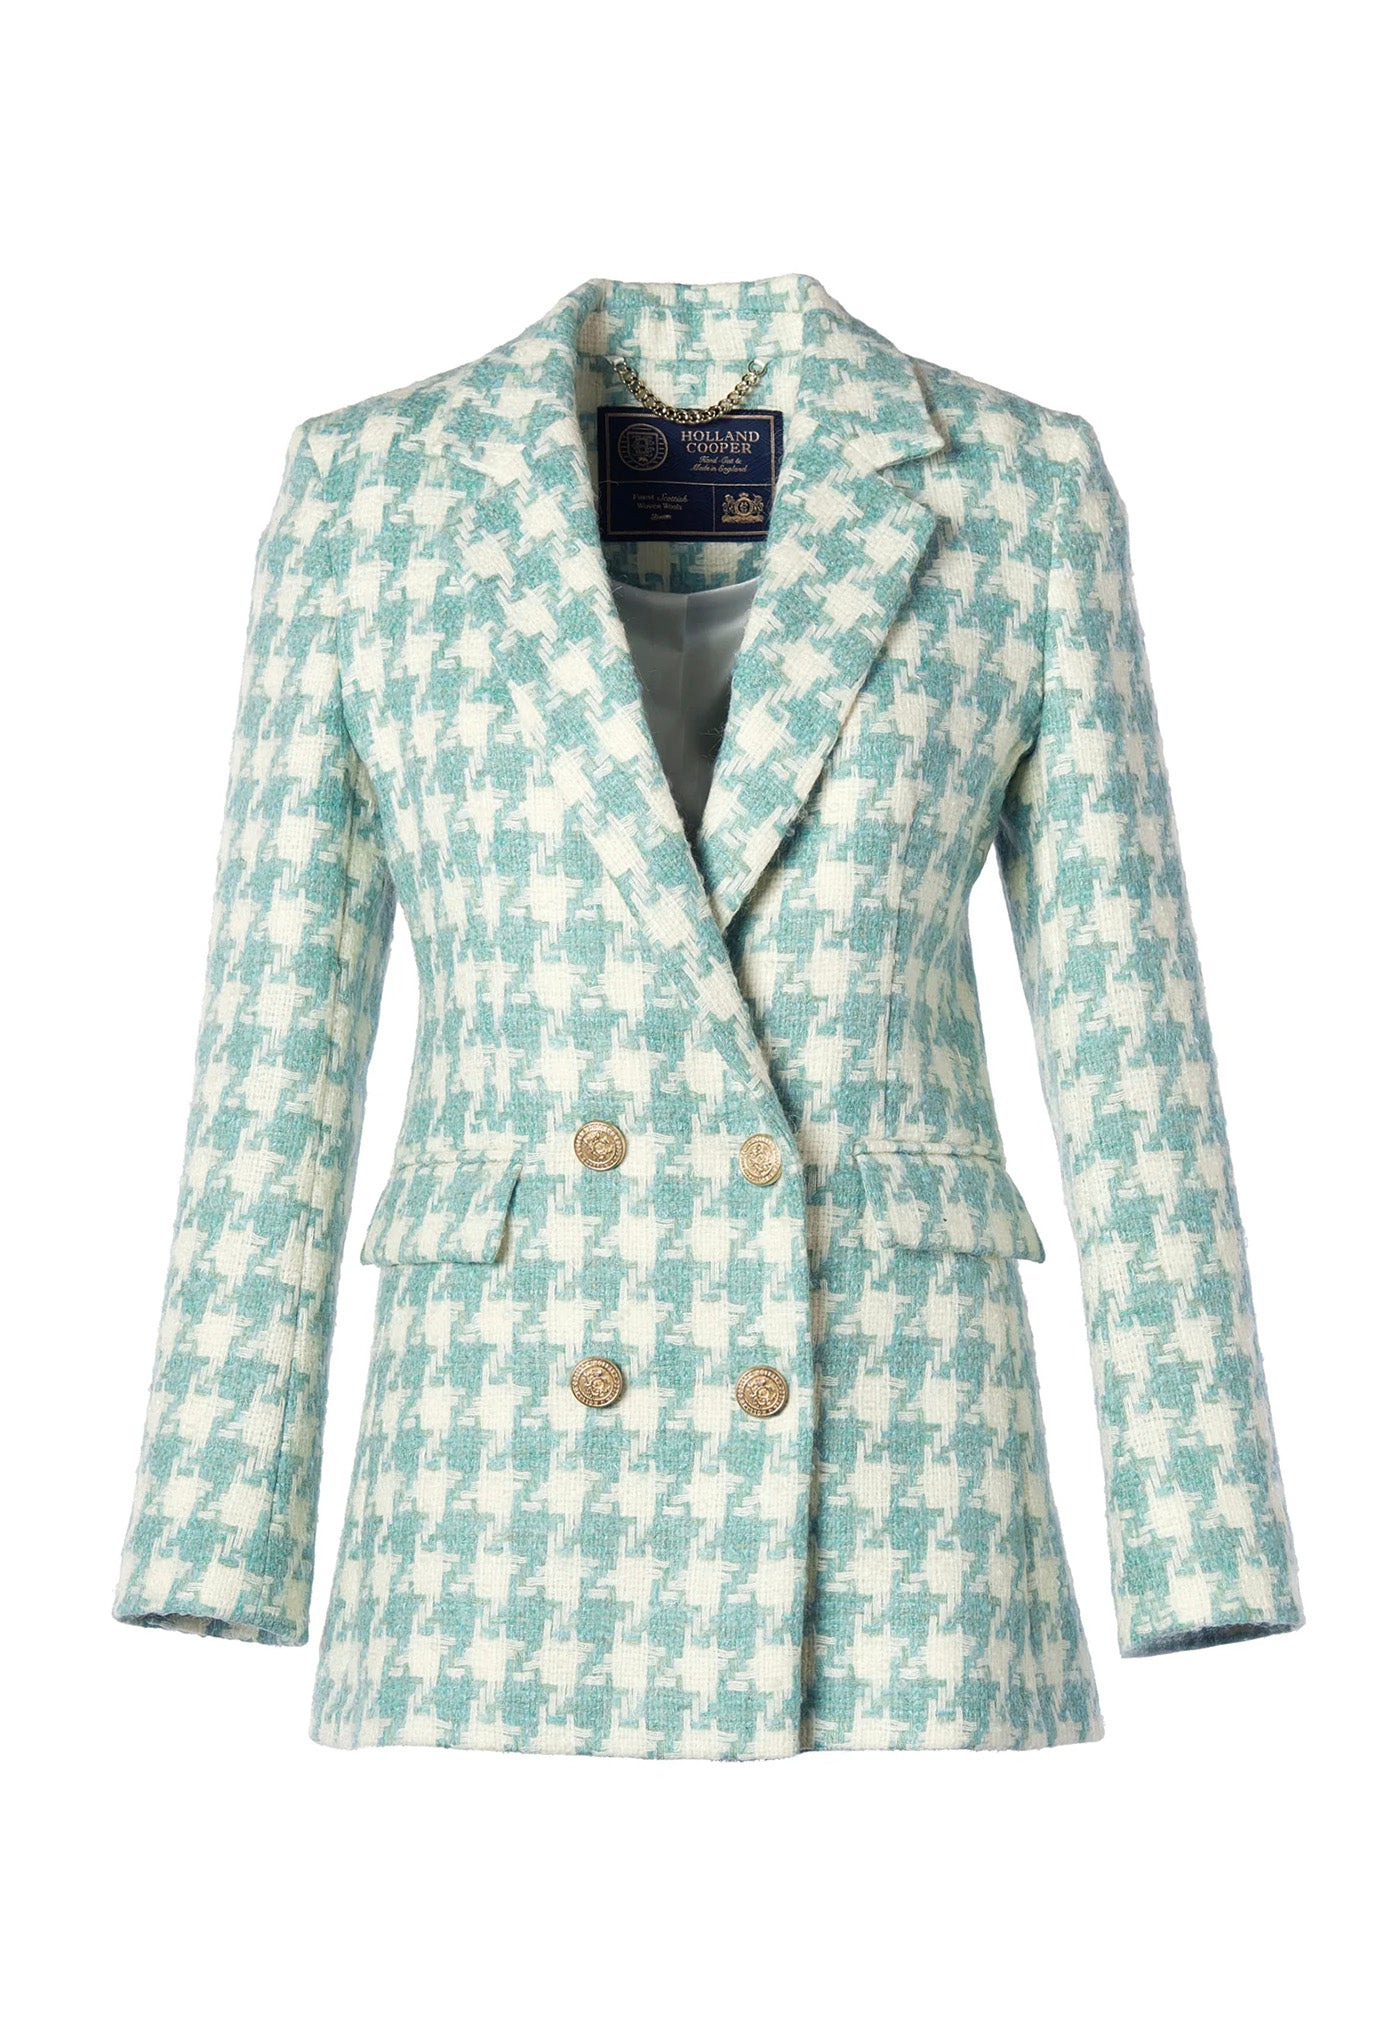 Double Breasted Blazer - Large Scale Teal Houndstooth sold by Angel Divine